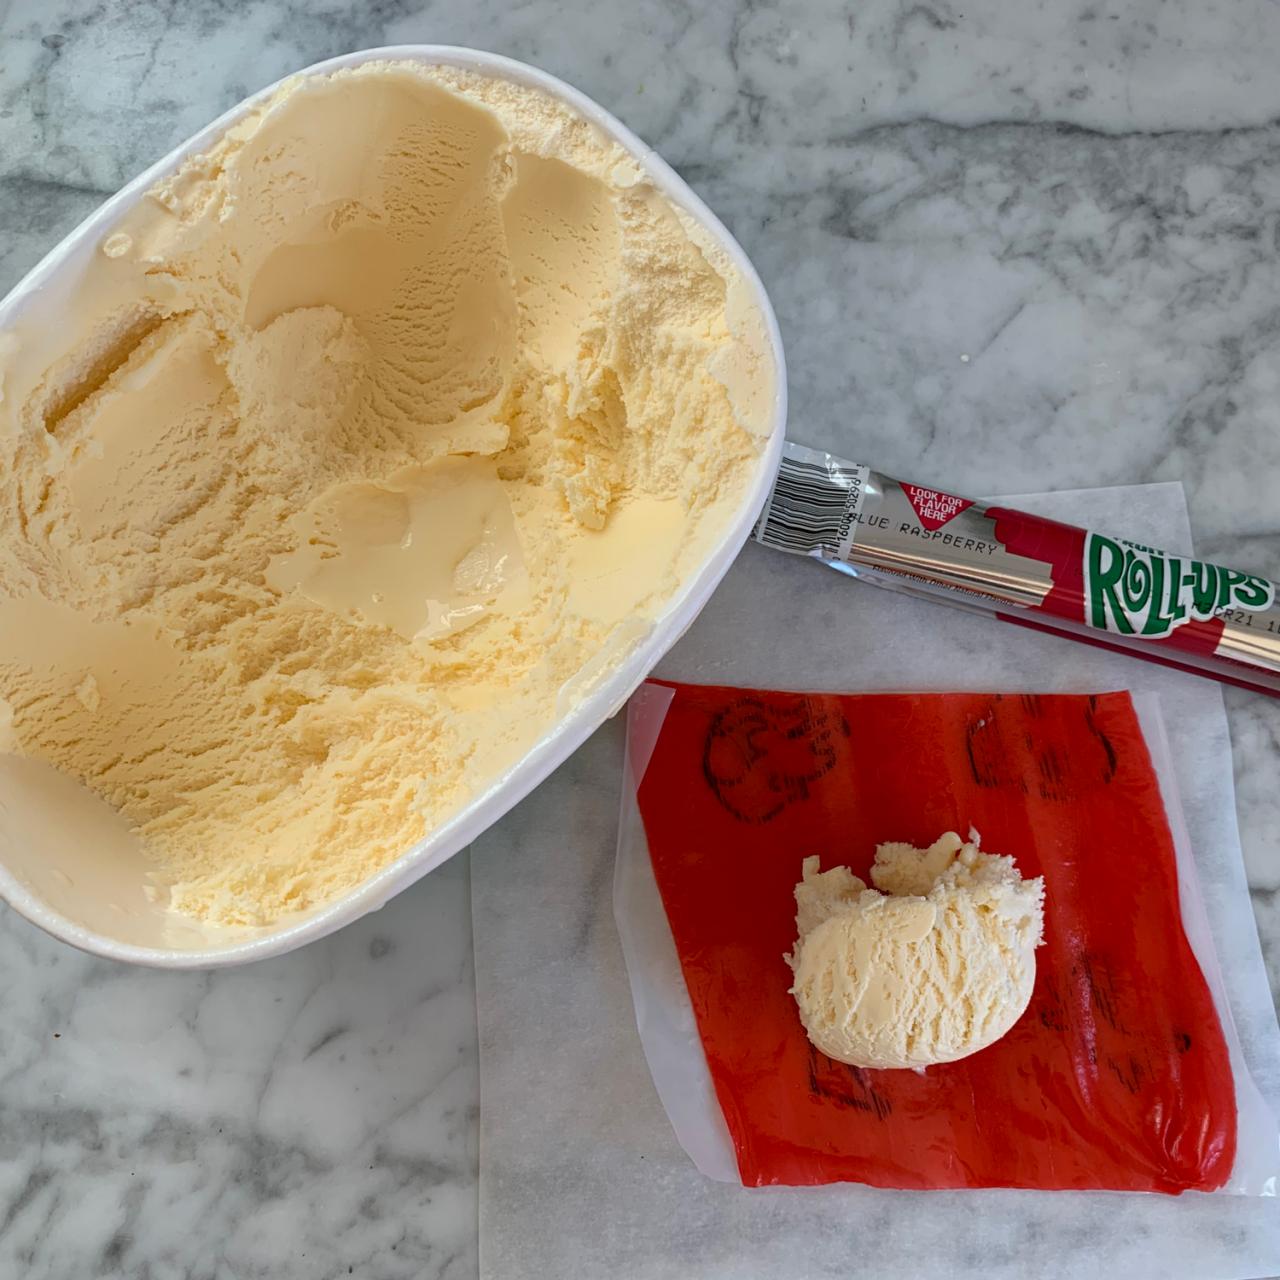 I Tried The Kitchen Gadget That Says It Can Turn Any Fruit Into Ice Cream